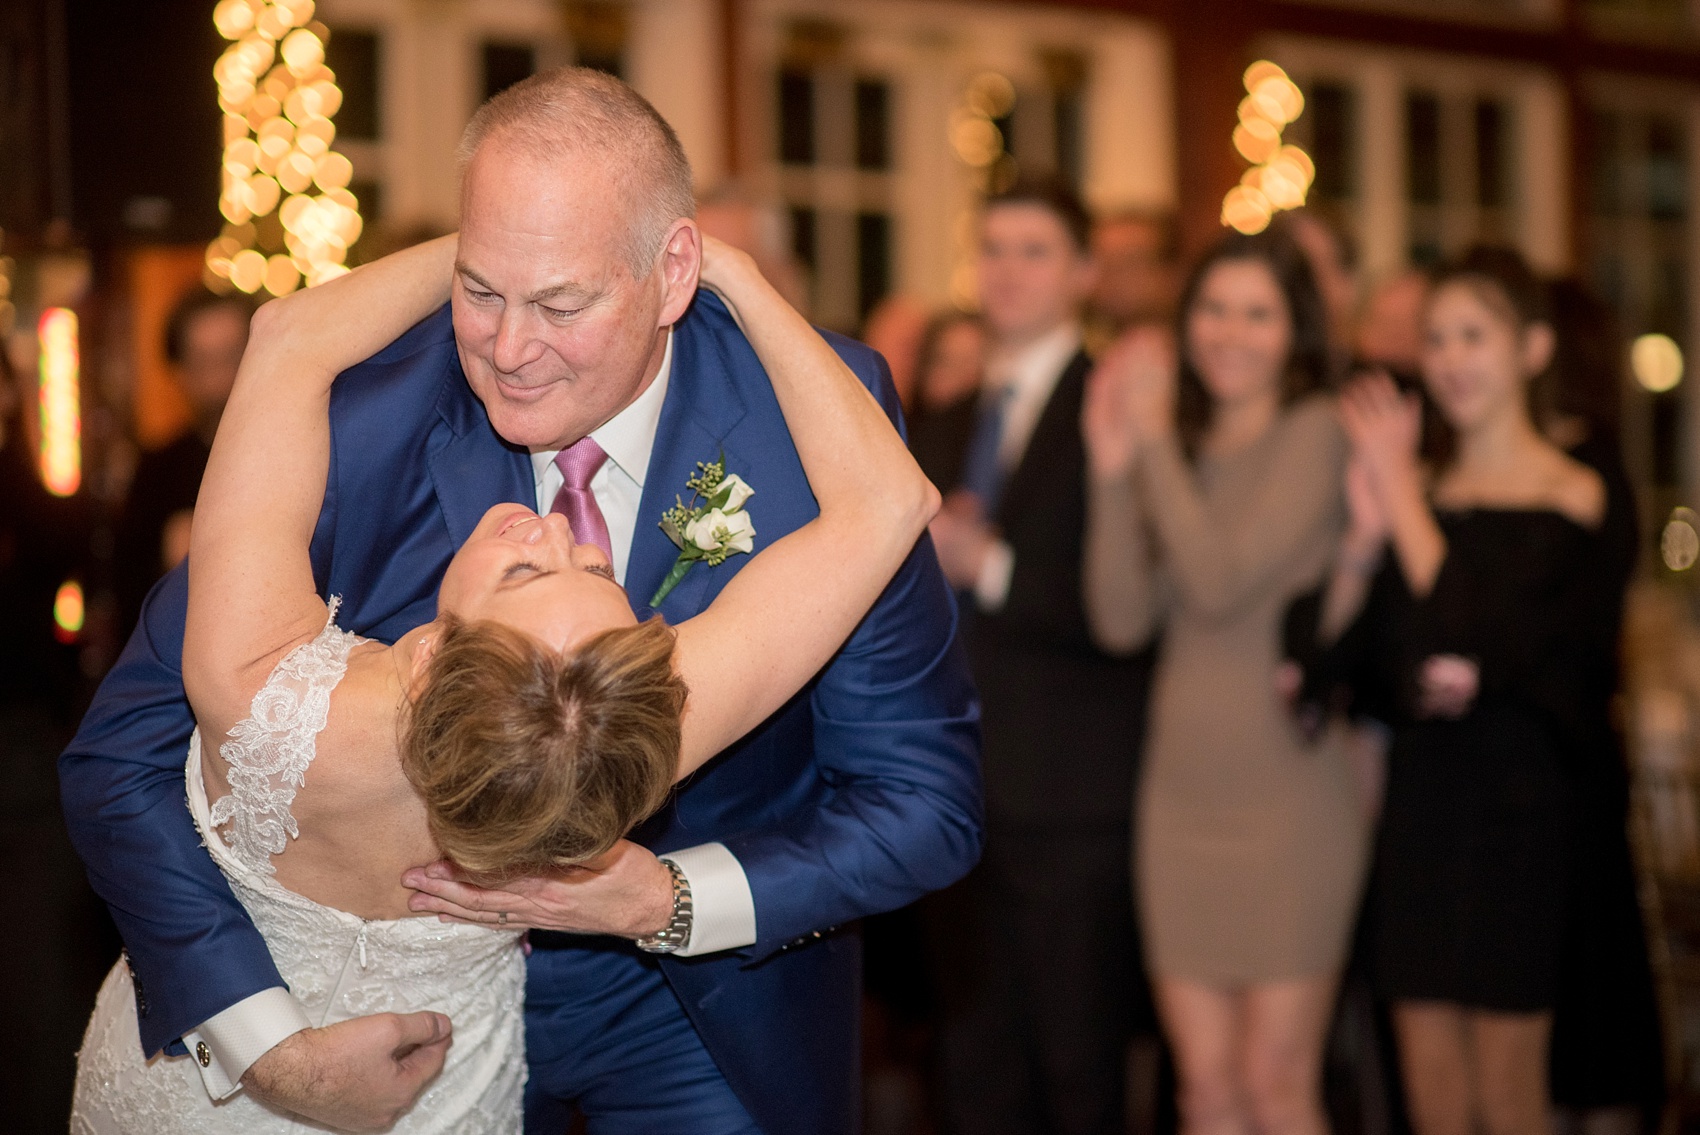 Photos by Mikkel Paige Photography of a Central Park Wedding reception at the Loeb Boathouse venue with a romantic winter theme. Picture of the bride and groom's first dance. Click through for more images from this beautiful day! #CentralParkWedding